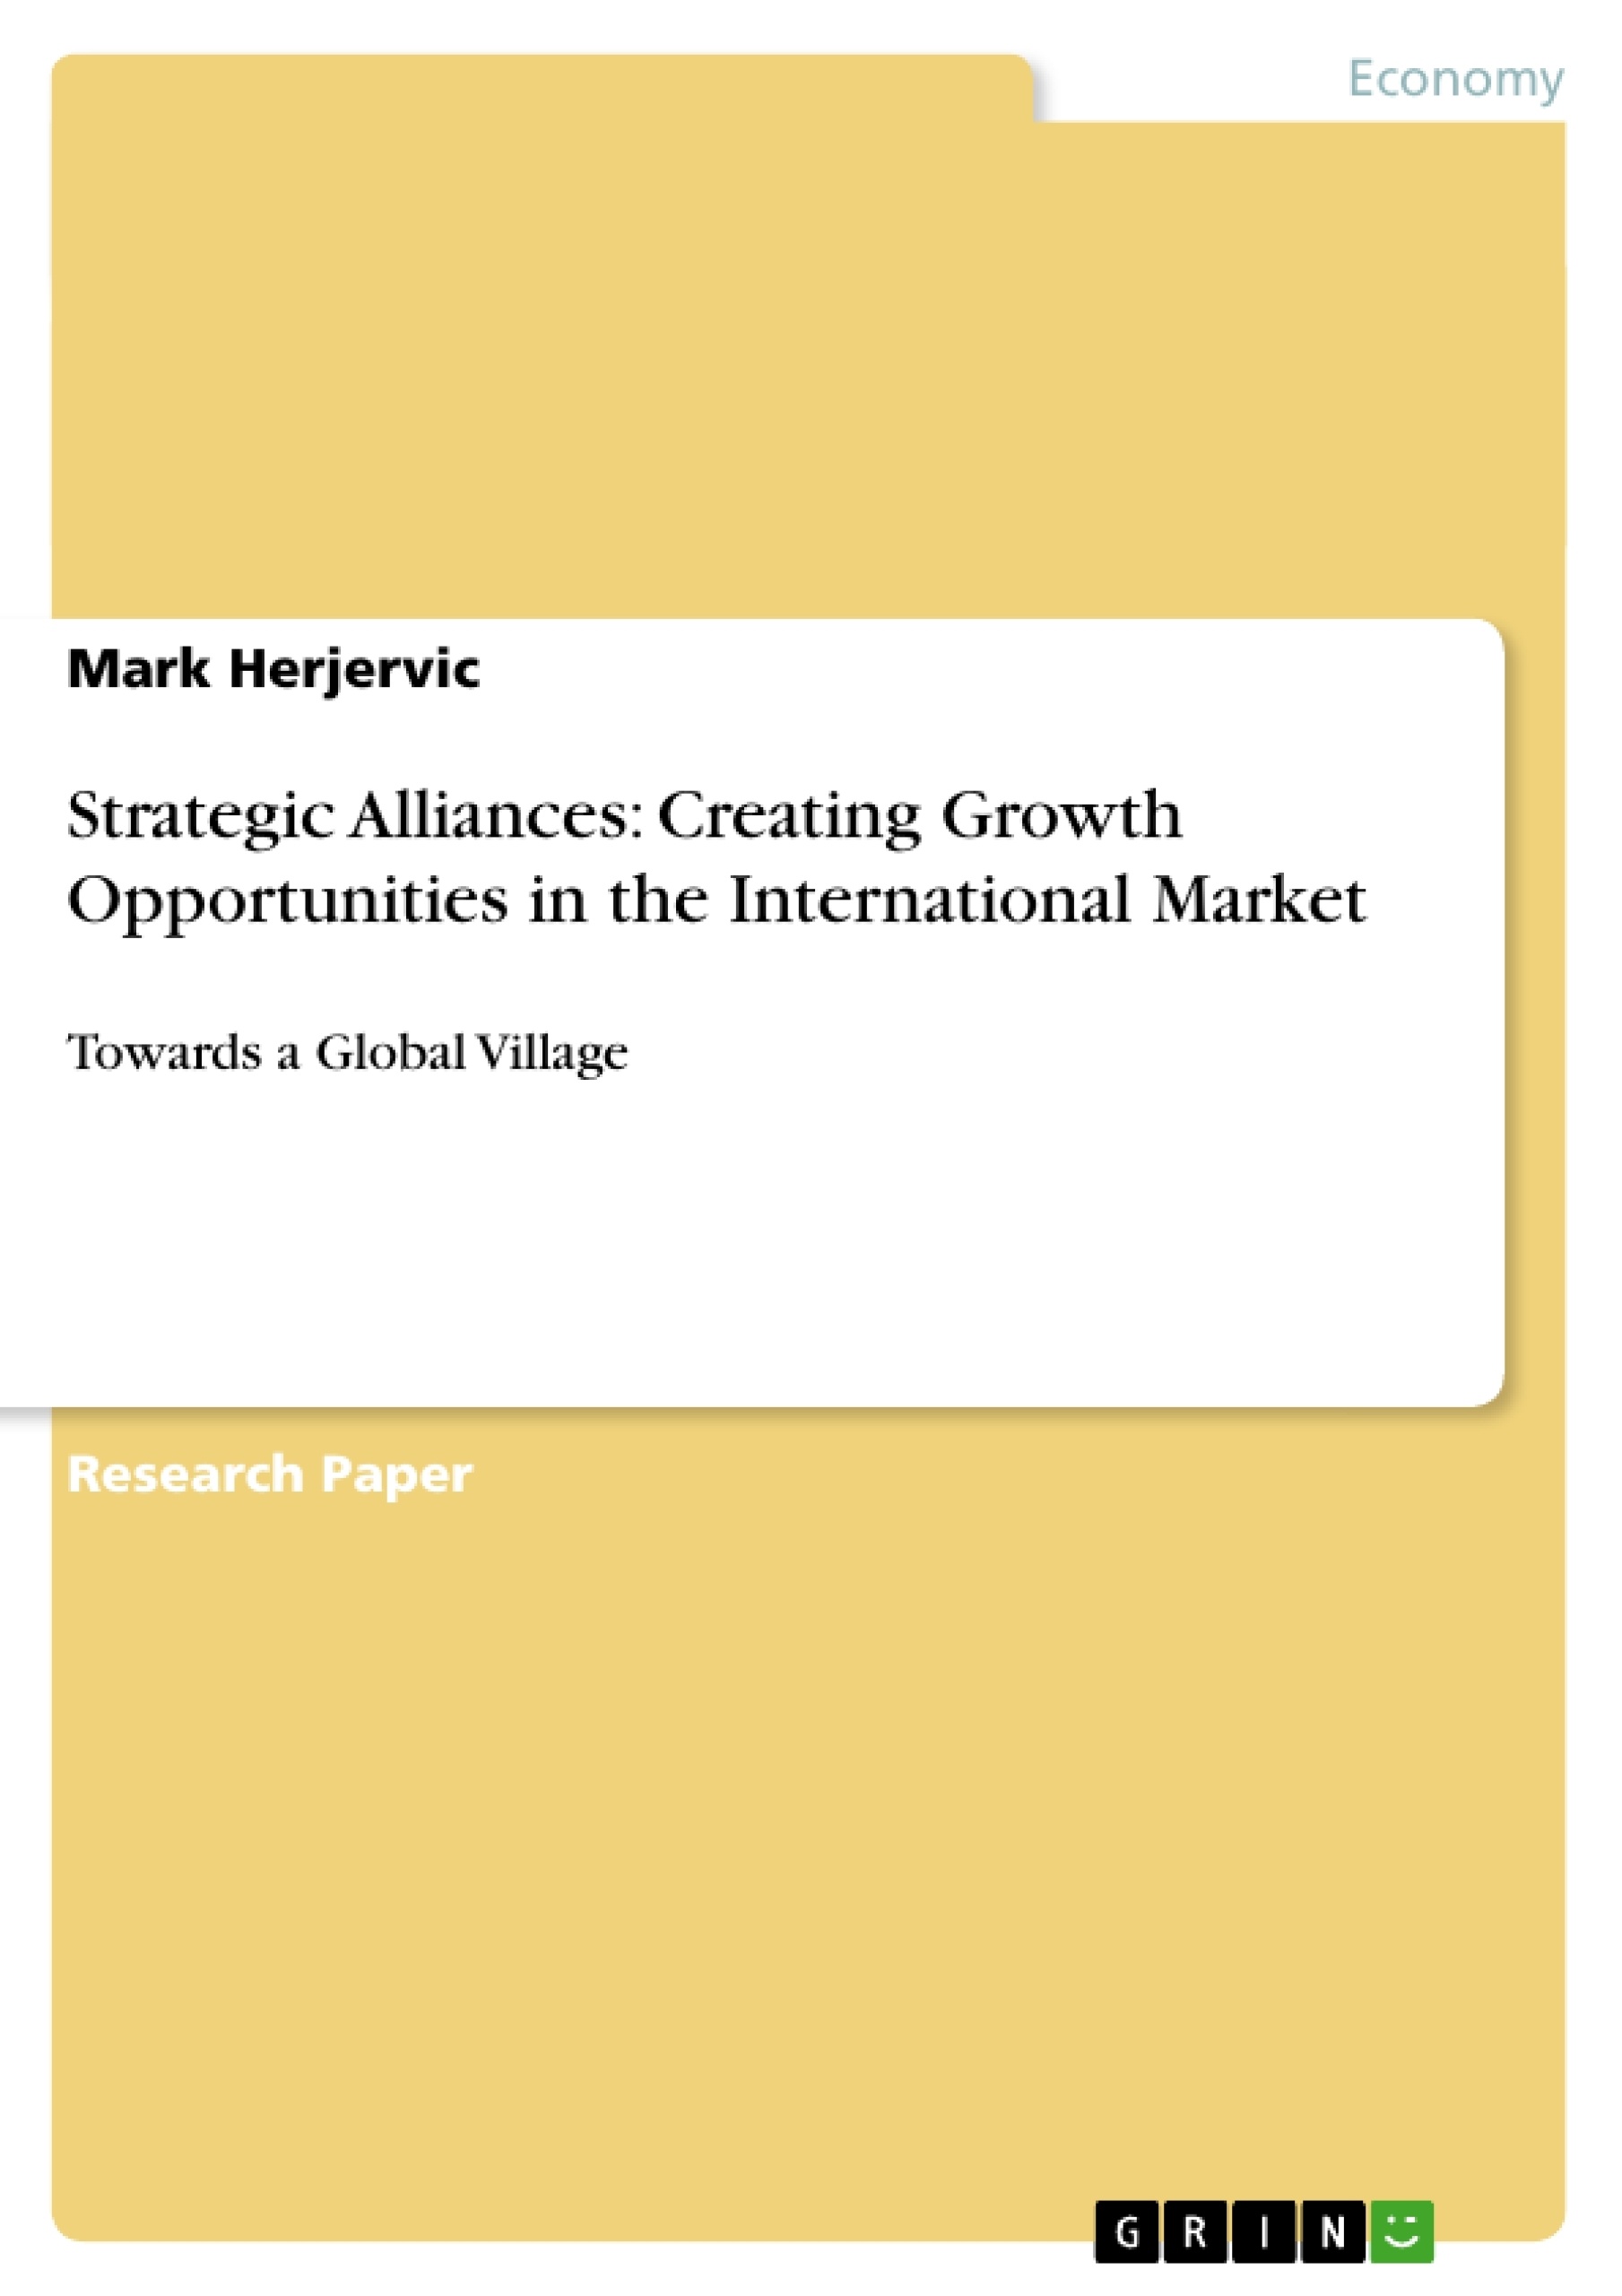 Title: Strategic Alliances: Creating Growth Opportunities in the International Market